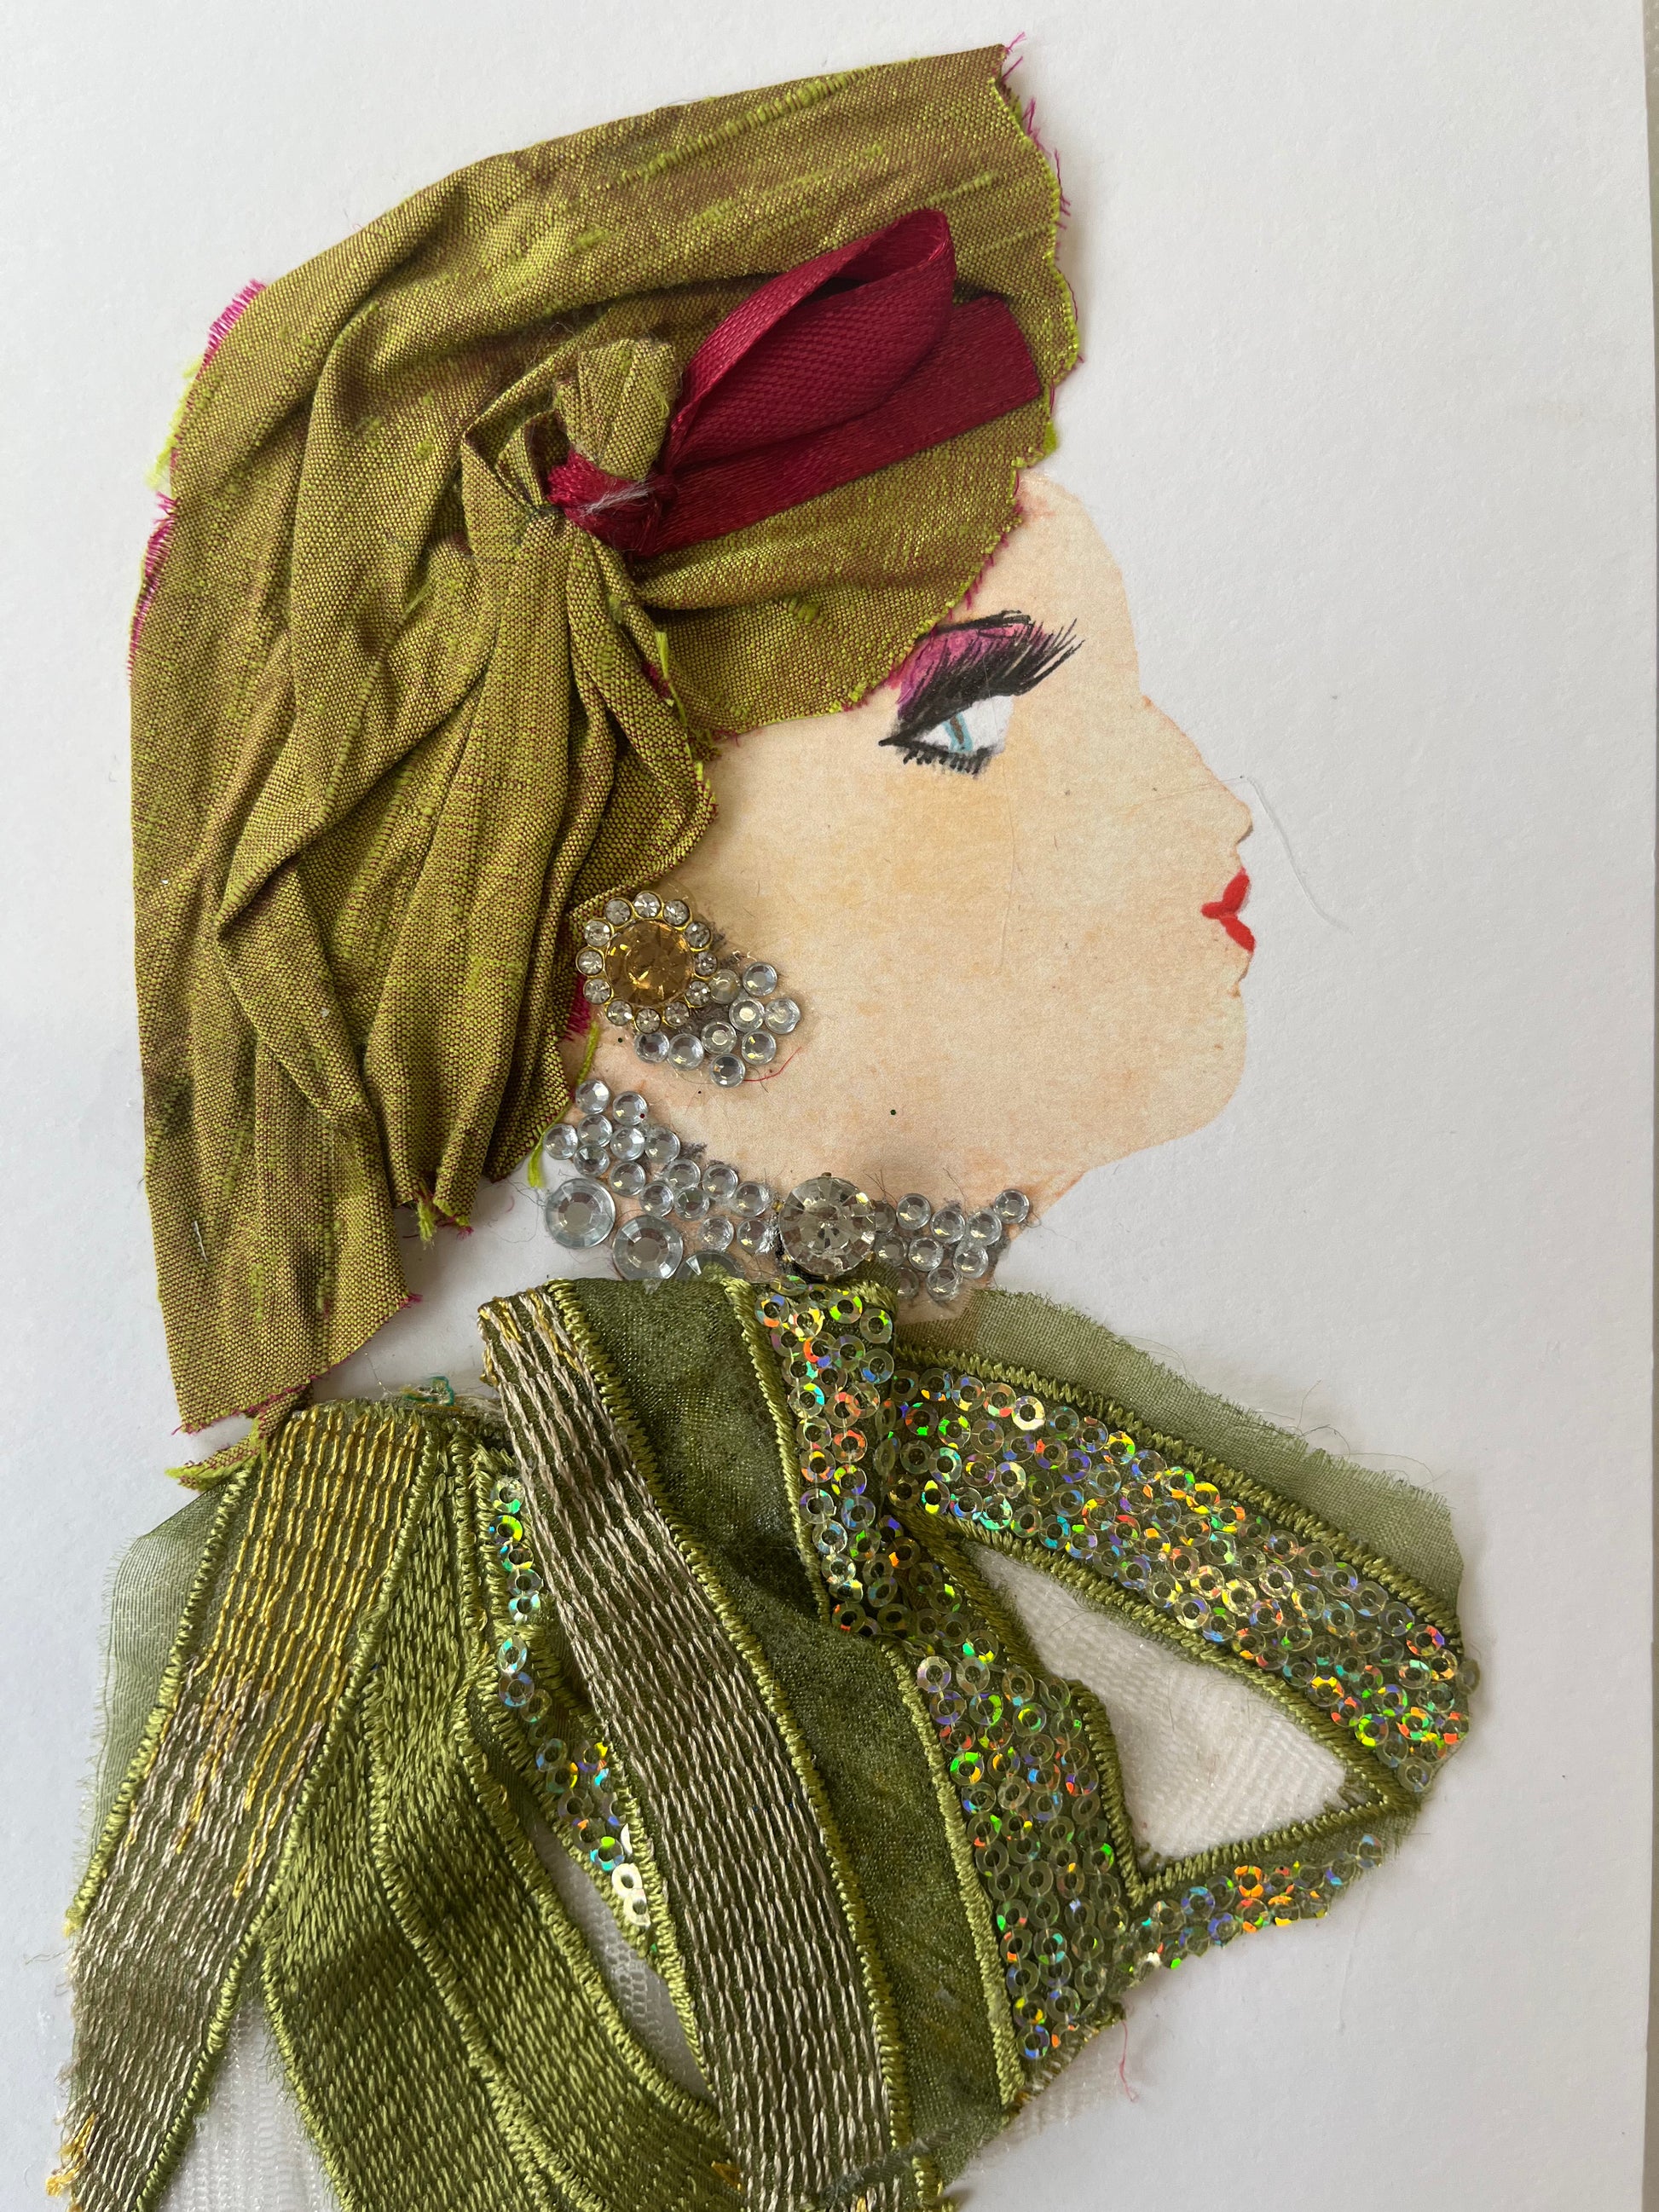 This card has been given the name Sally Sparkles. She wears a top made of ribbons of olive chiffon and sequins. She wears a headscarf that is also olive green but has an accent of rose pink in it. Her jewellery is a large diamanté earring with a yellow stone in the middle, and a matching diamanté necklace. 